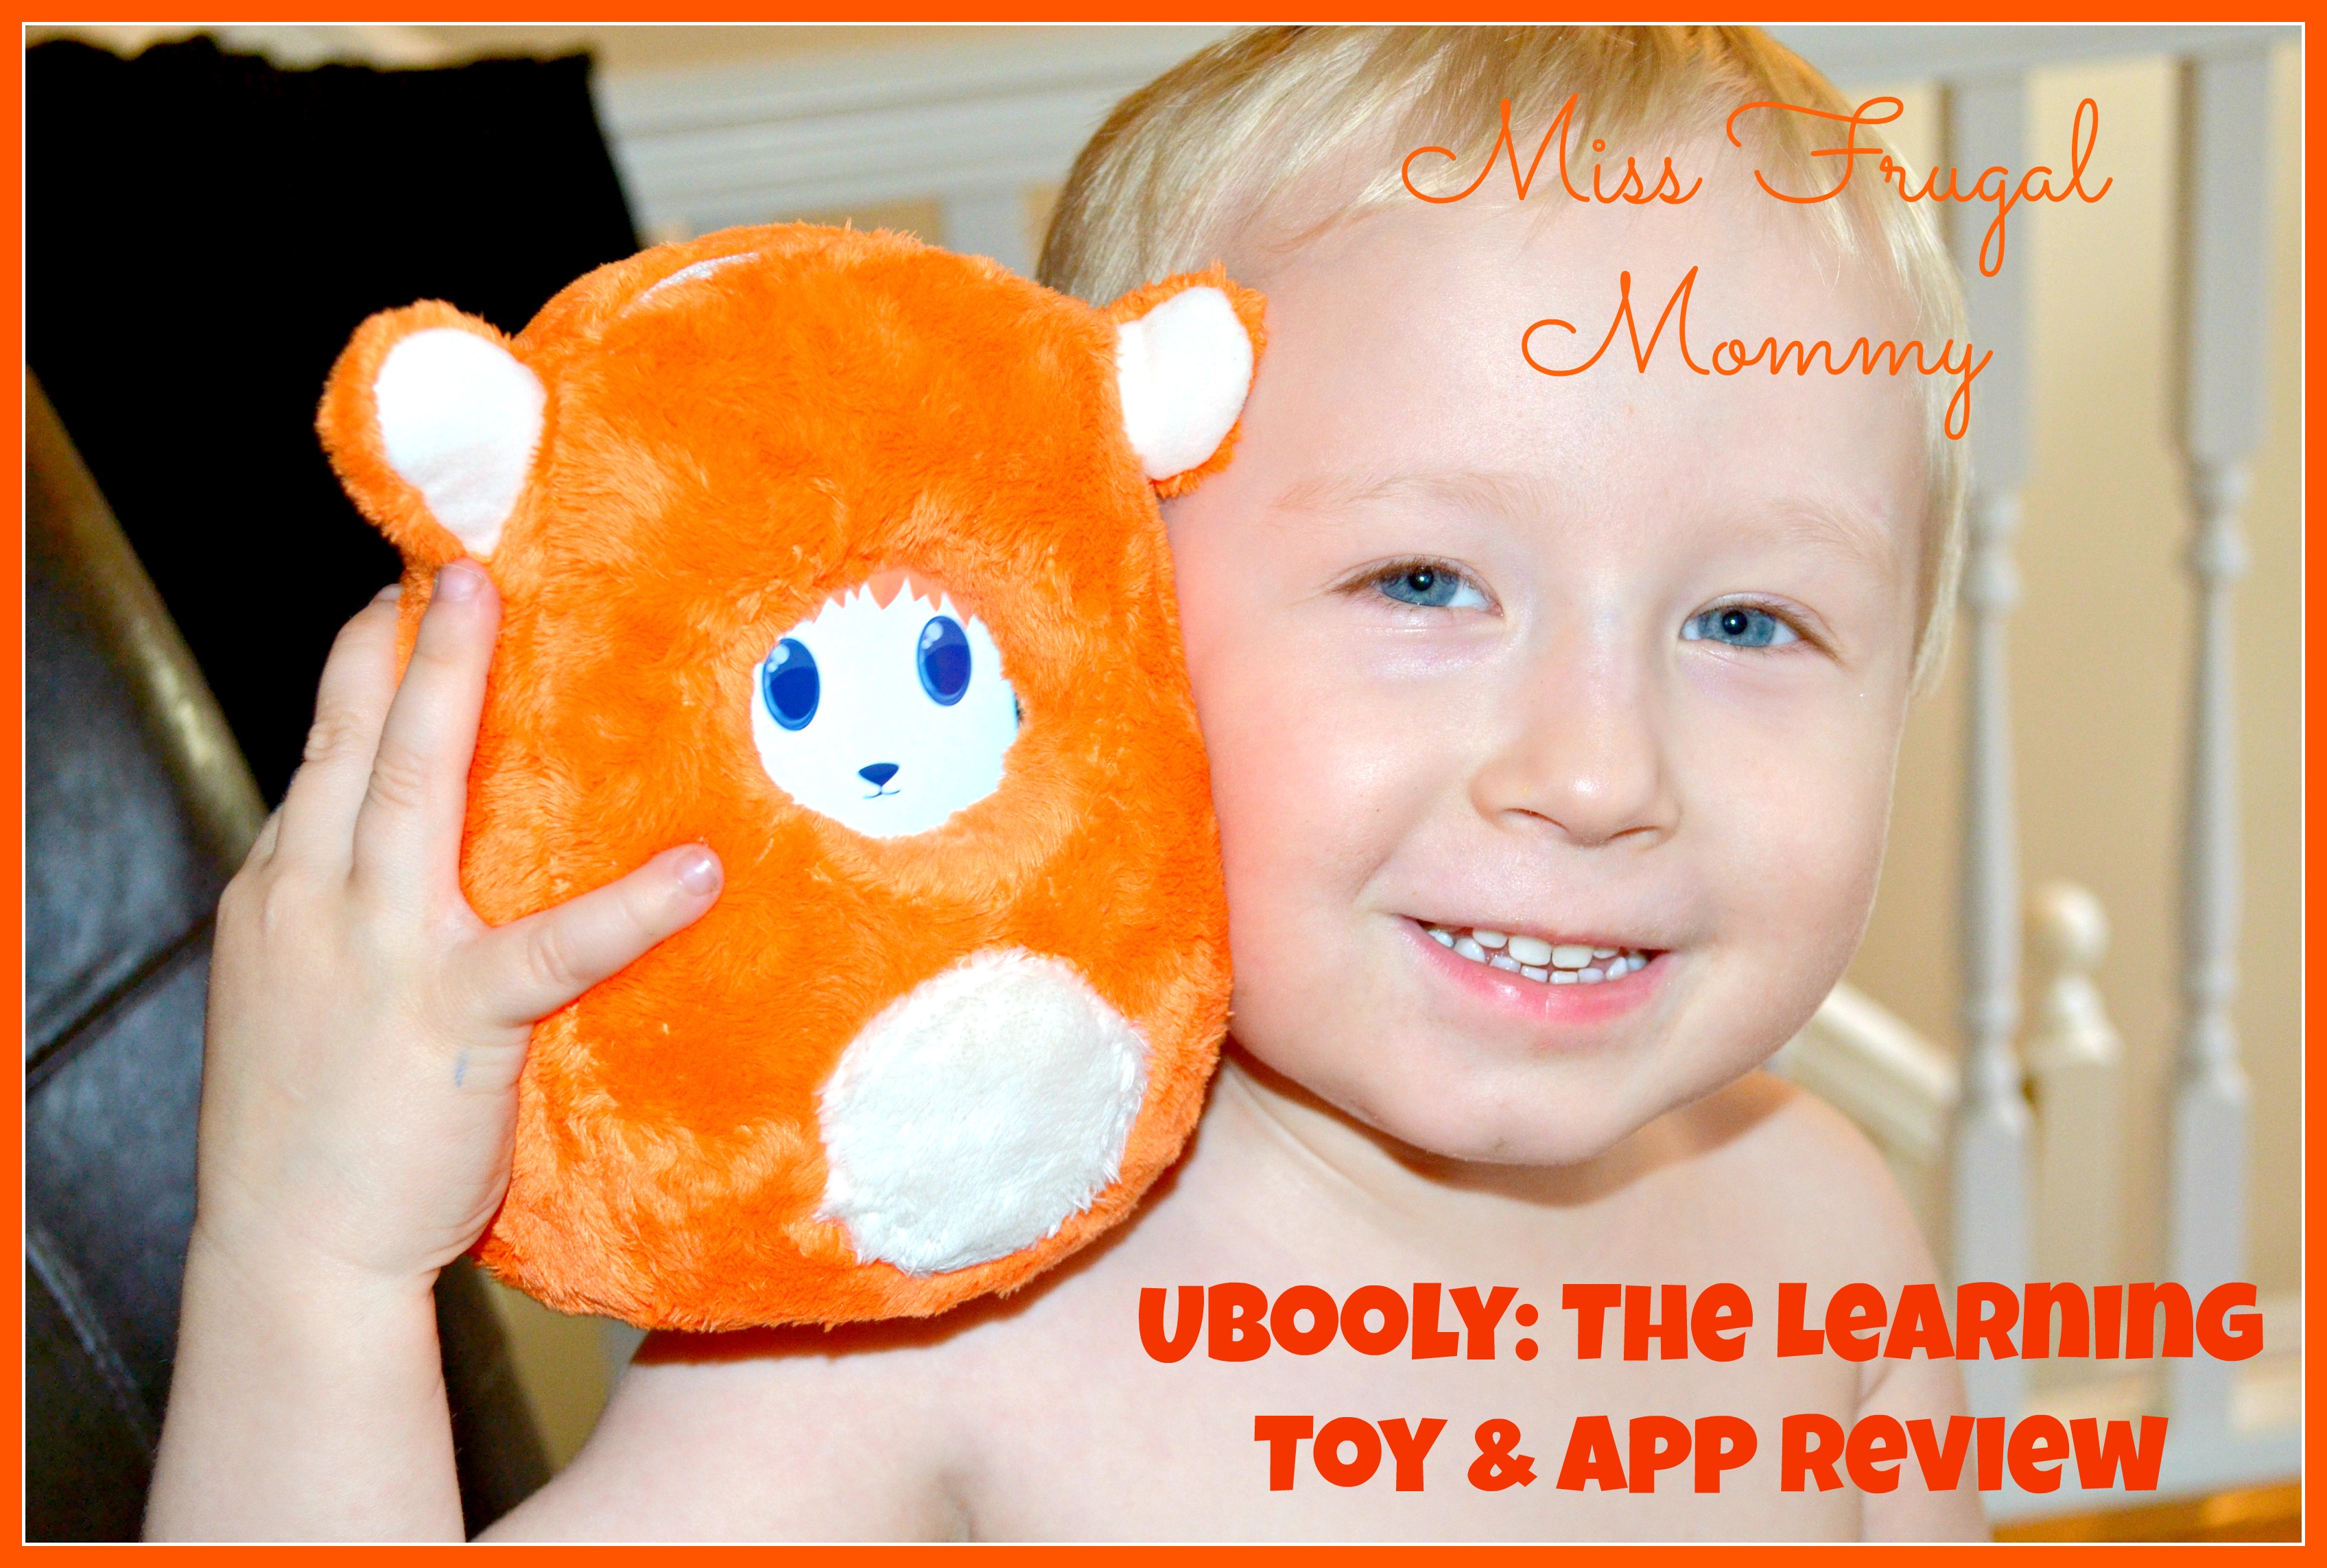 Ubooly: The Learning Toy & App Review